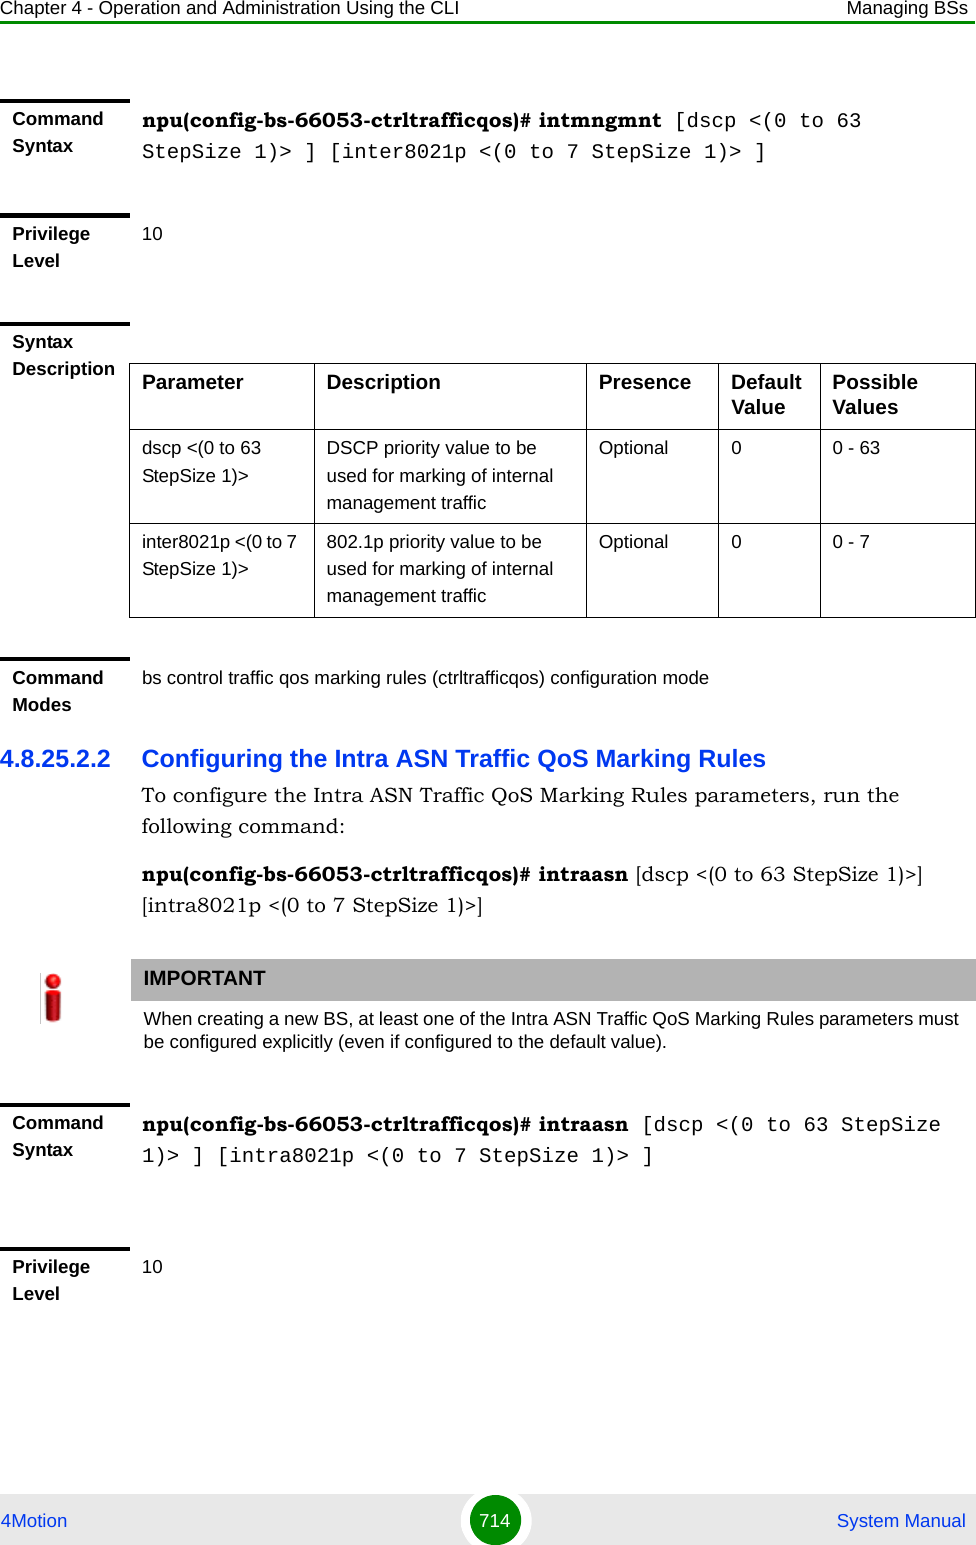 Chapter 4 - Operation and Administration Using the CLI Managing BSs4Motion 714  System Manual4.8.25.2.2 Configuring the Intra ASN Traffic QoS Marking RulesTo configure the Intra ASN Traffic QoS Marking Rules parameters, run the following command:npu(config-bs-66053-ctrltrafficqos)# intraasn [dscp &lt;(0 to 63 StepSize 1)&gt;] [intra8021p &lt;(0 to 7 StepSize 1)&gt;]Command Syntaxnpu(config-bs-66053-ctrltrafficqos)# intmngmnt [dscp &lt;(0 to 63 StepSize 1)&gt; ] [inter8021p &lt;(0 to 7 StepSize 1)&gt; ]Privilege Level10Syntax Description Parameter Description Presence Default Value Possible Valuesdscp &lt;(0 to 63 StepSize 1)&gt;DSCP priority value to be used for marking of internal management trafficOptional 0 0 - 63inter8021p &lt;(0 to 7 StepSize 1)&gt;802.1p priority value to be used for marking of internal management trafficOptional 0 0 - 7Command Modesbs control traffic qos marking rules (ctrltrafficqos) configuration mode IMPORTANTWhen creating a new BS, at least one of the Intra ASN Traffic QoS Marking Rules parameters must be configured explicitly (even if configured to the default value).Command Syntaxnpu(config-bs-66053-ctrltrafficqos)# intraasn [dscp &lt;(0 to 63 StepSize 1)&gt; ] [intra8021p &lt;(0 to 7 StepSize 1)&gt; ]Privilege Level10